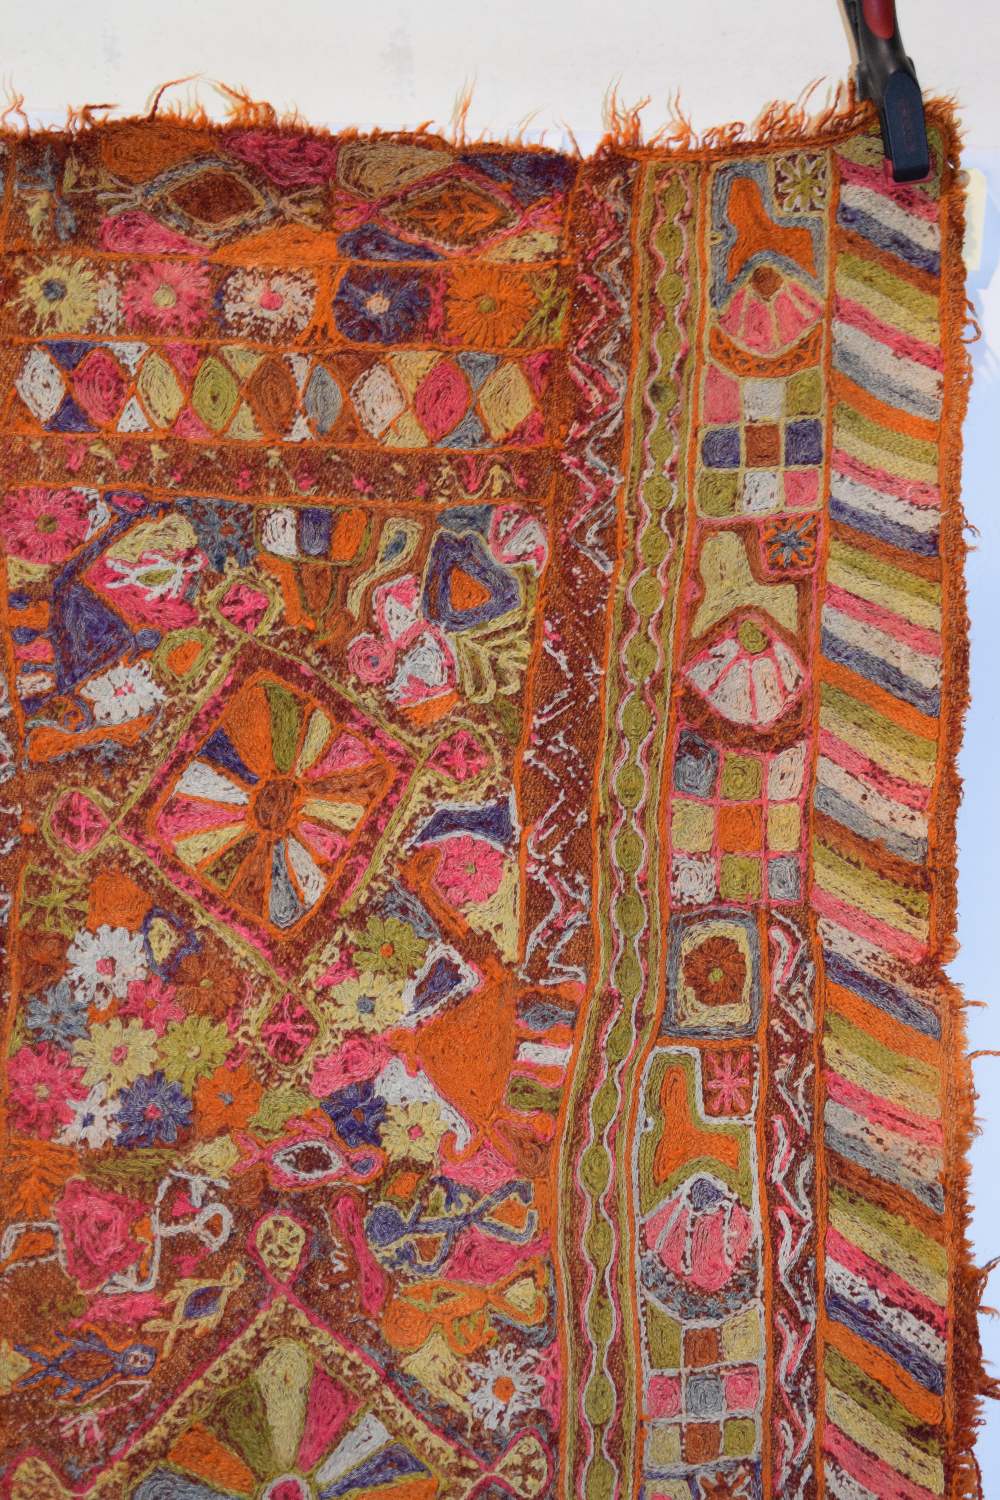 Iraqi embroidered wedding blanket, Samawa, Marshlands of southern Iraq, 20th century, 5ft. 4in. 1. - Image 3 of 13